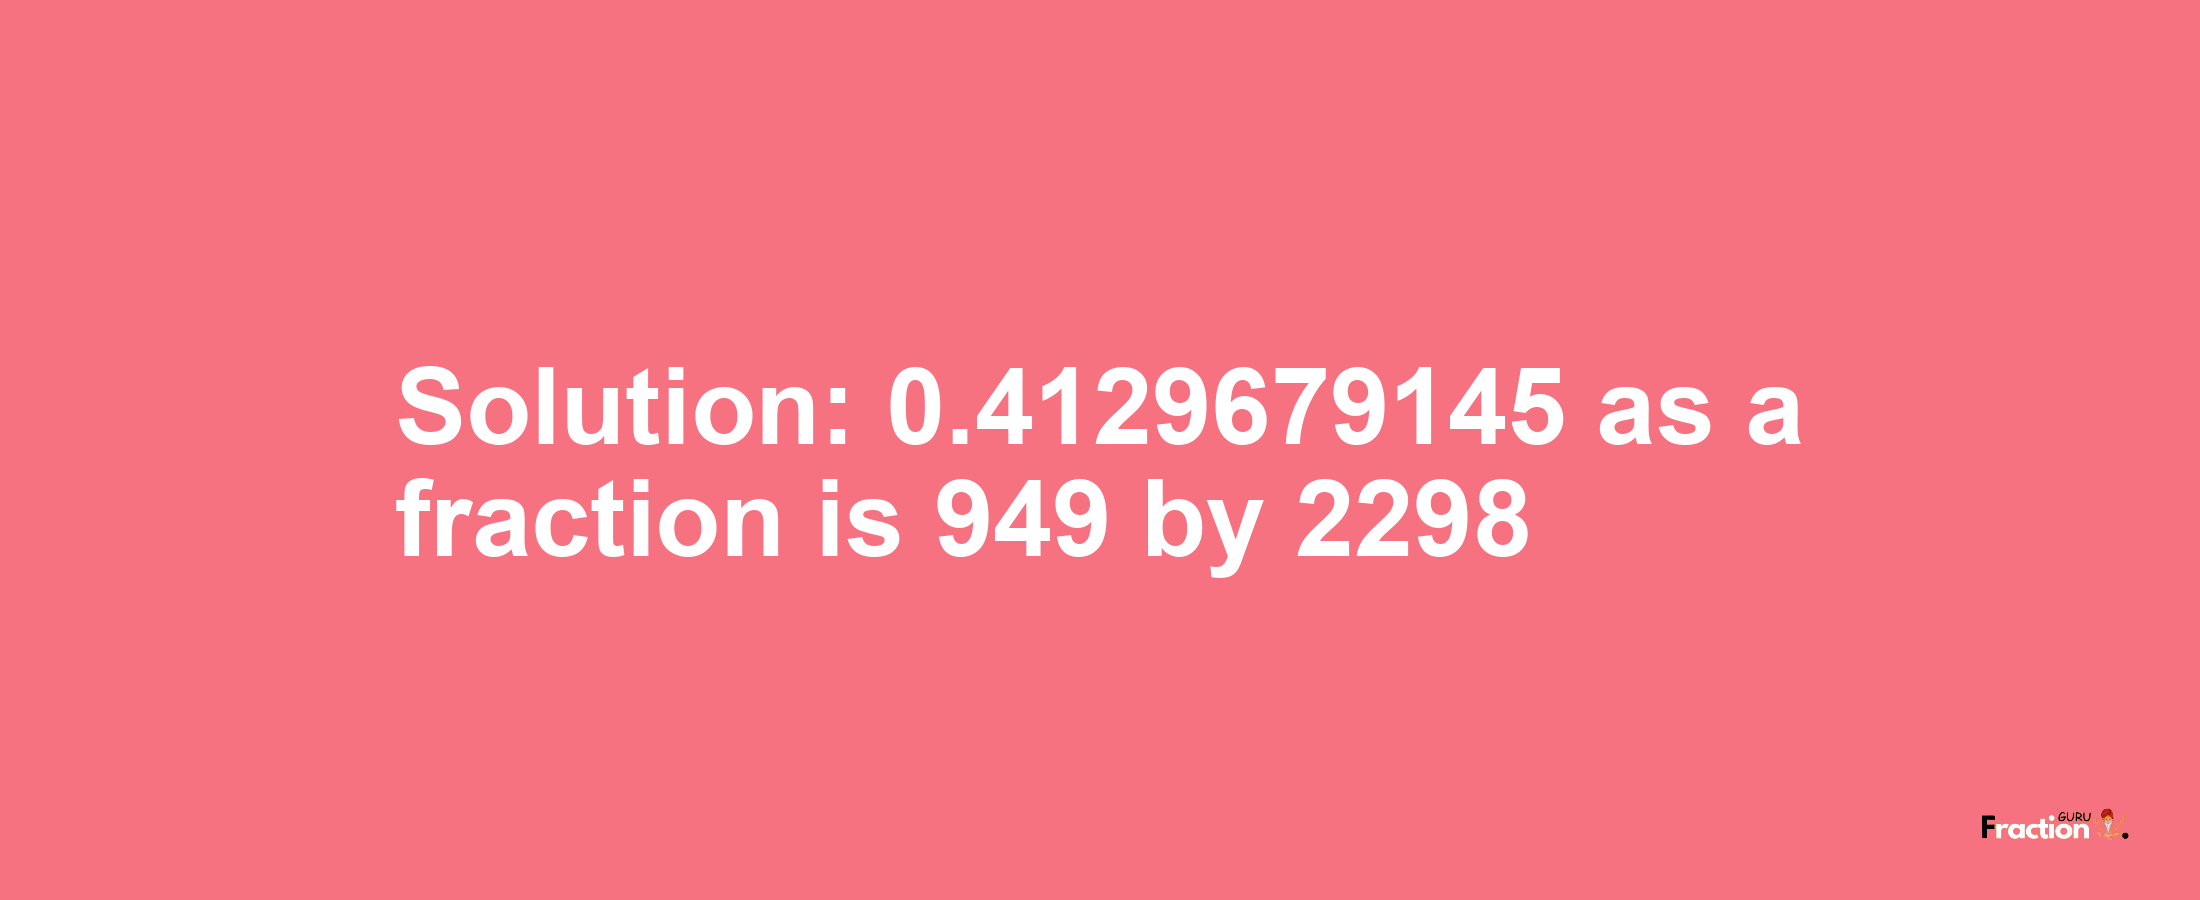 Solution:0.4129679145 as a fraction is 949/2298